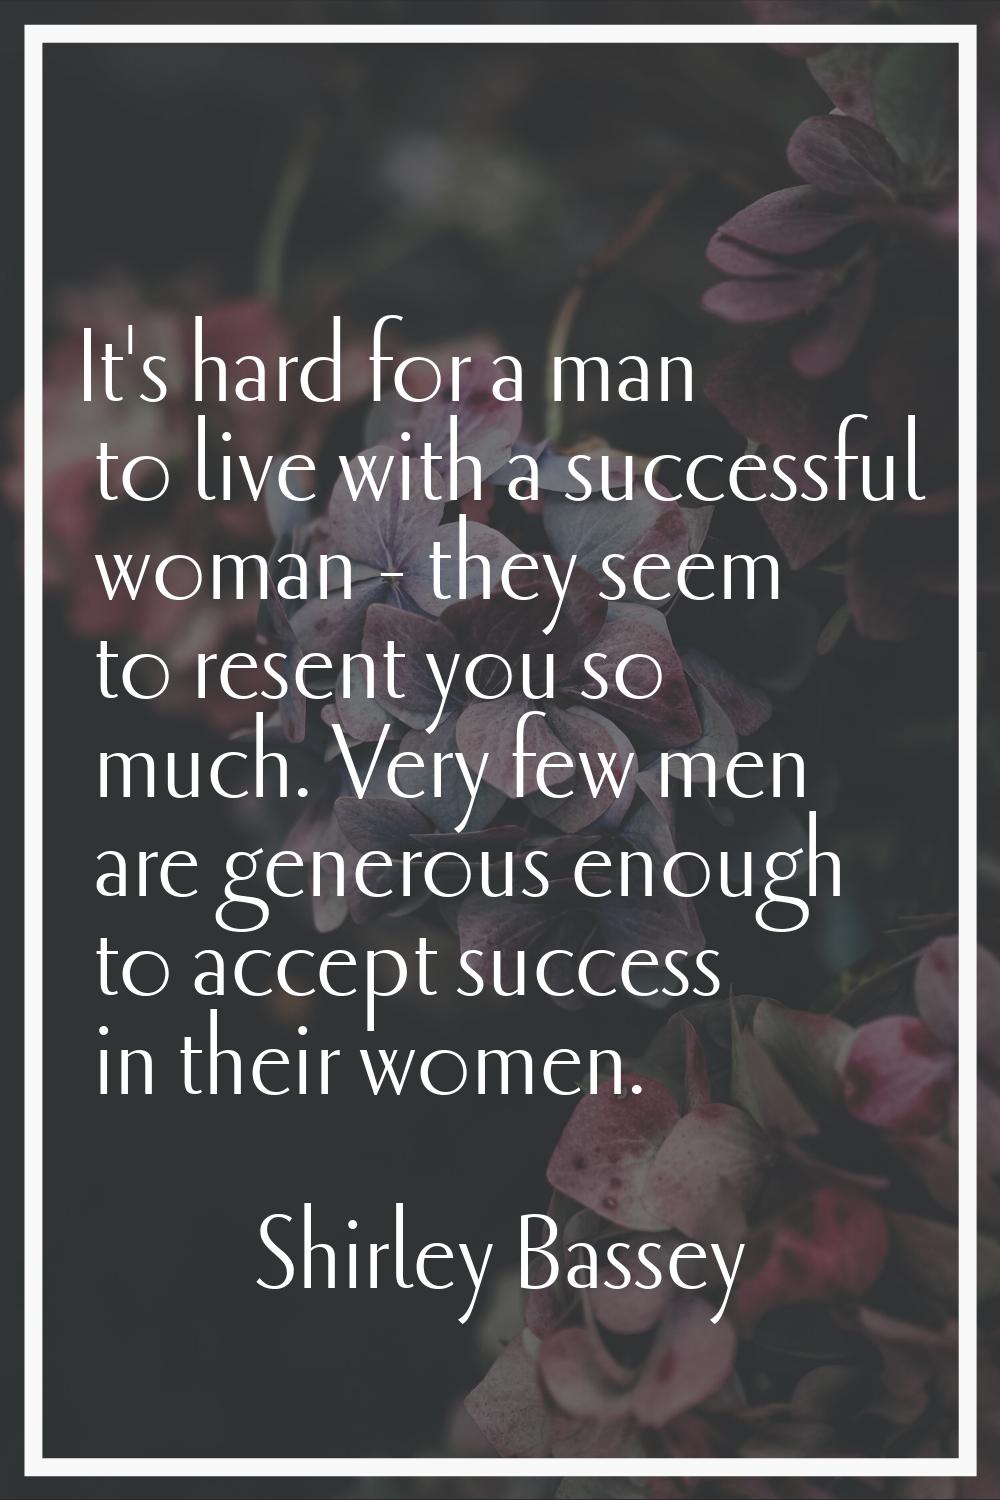 It's hard for a man to live with a successful woman - they seem to resent you so much. Very few men